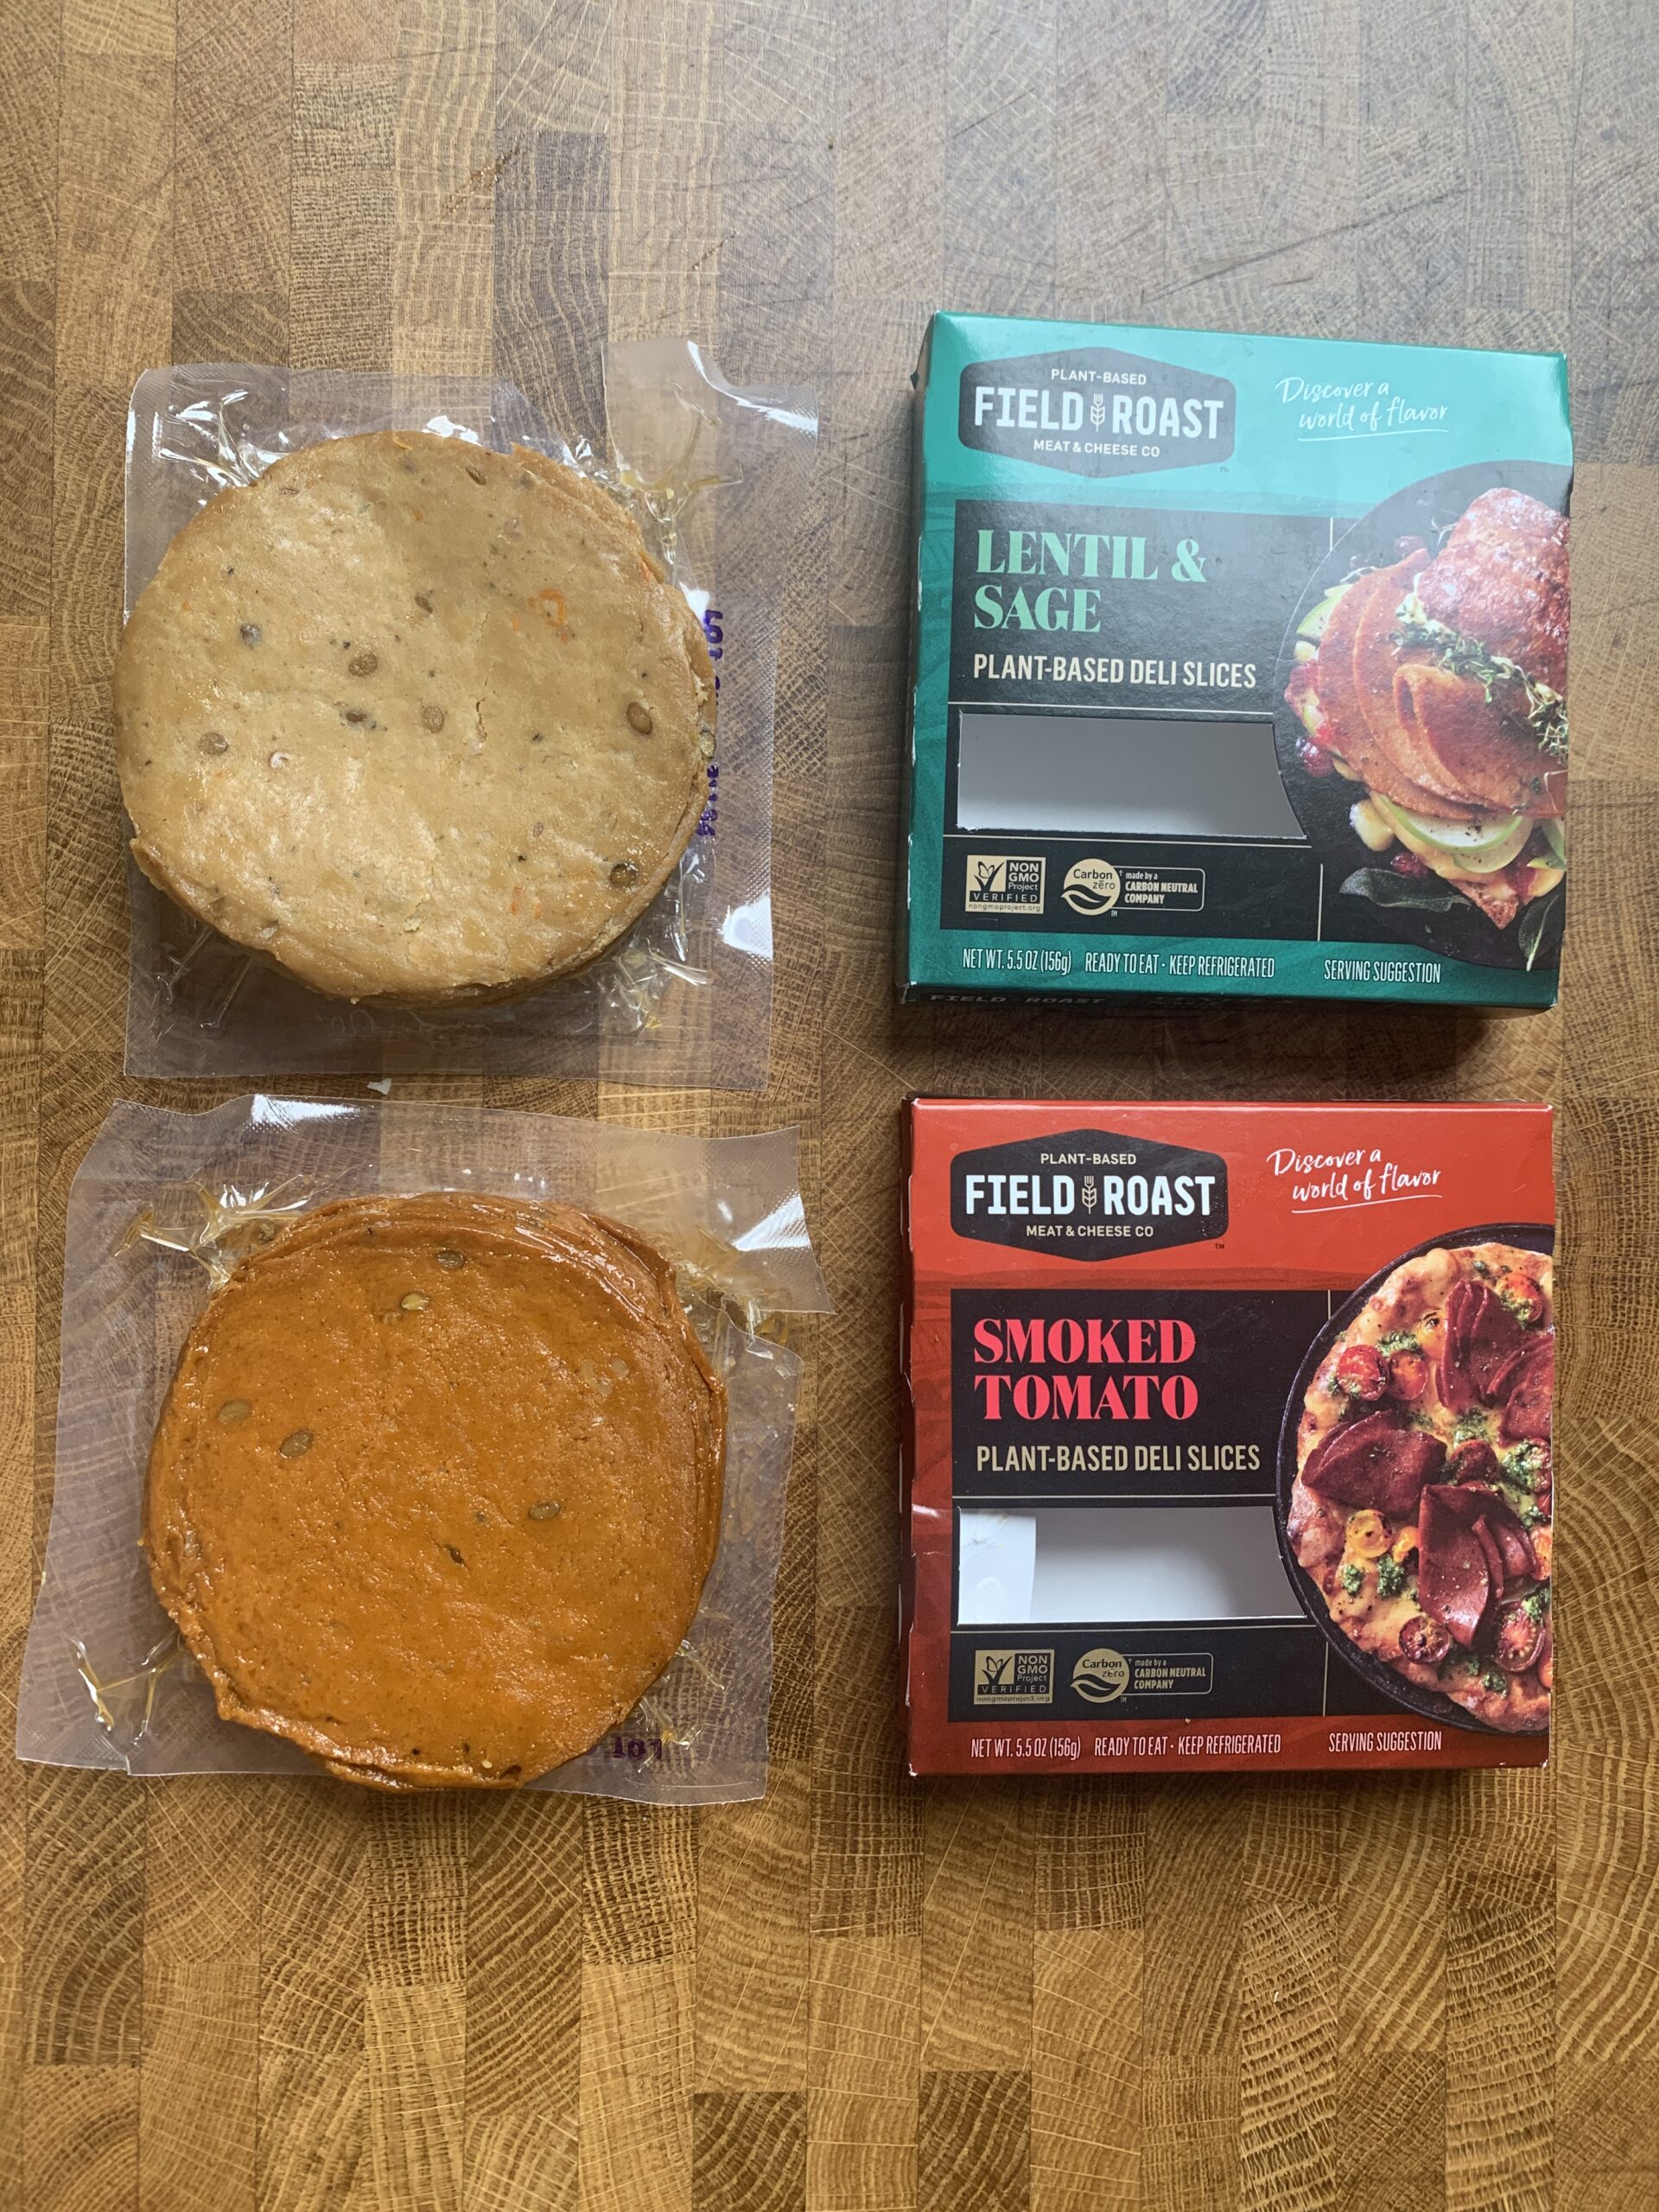 Field Roast Plan-based deli slices lentil and sage and smoked tomato packages.